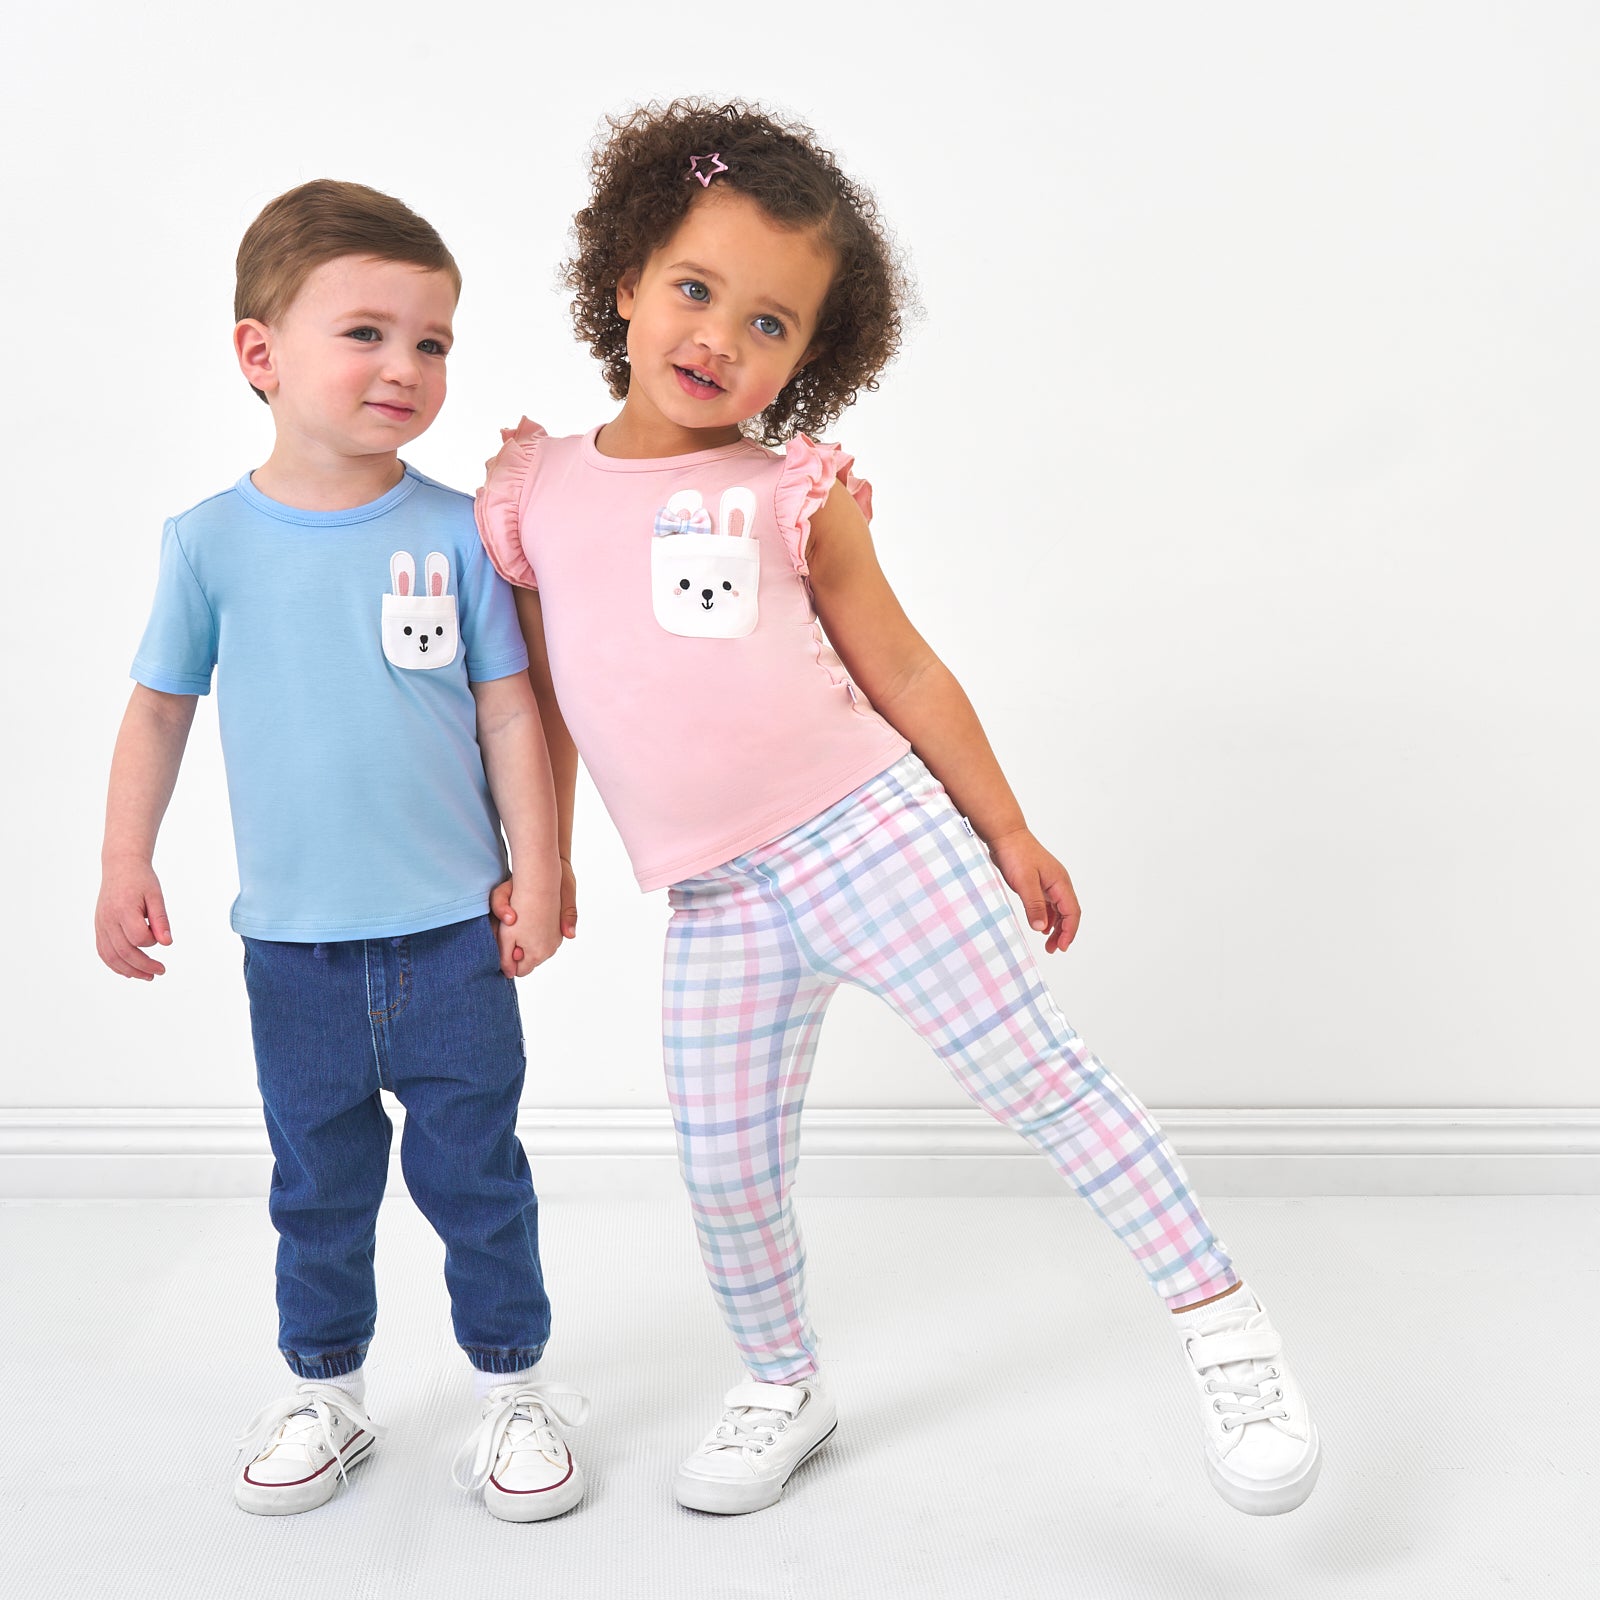 Two children wearing coordinating Easter Play outfits by Little Sleepies